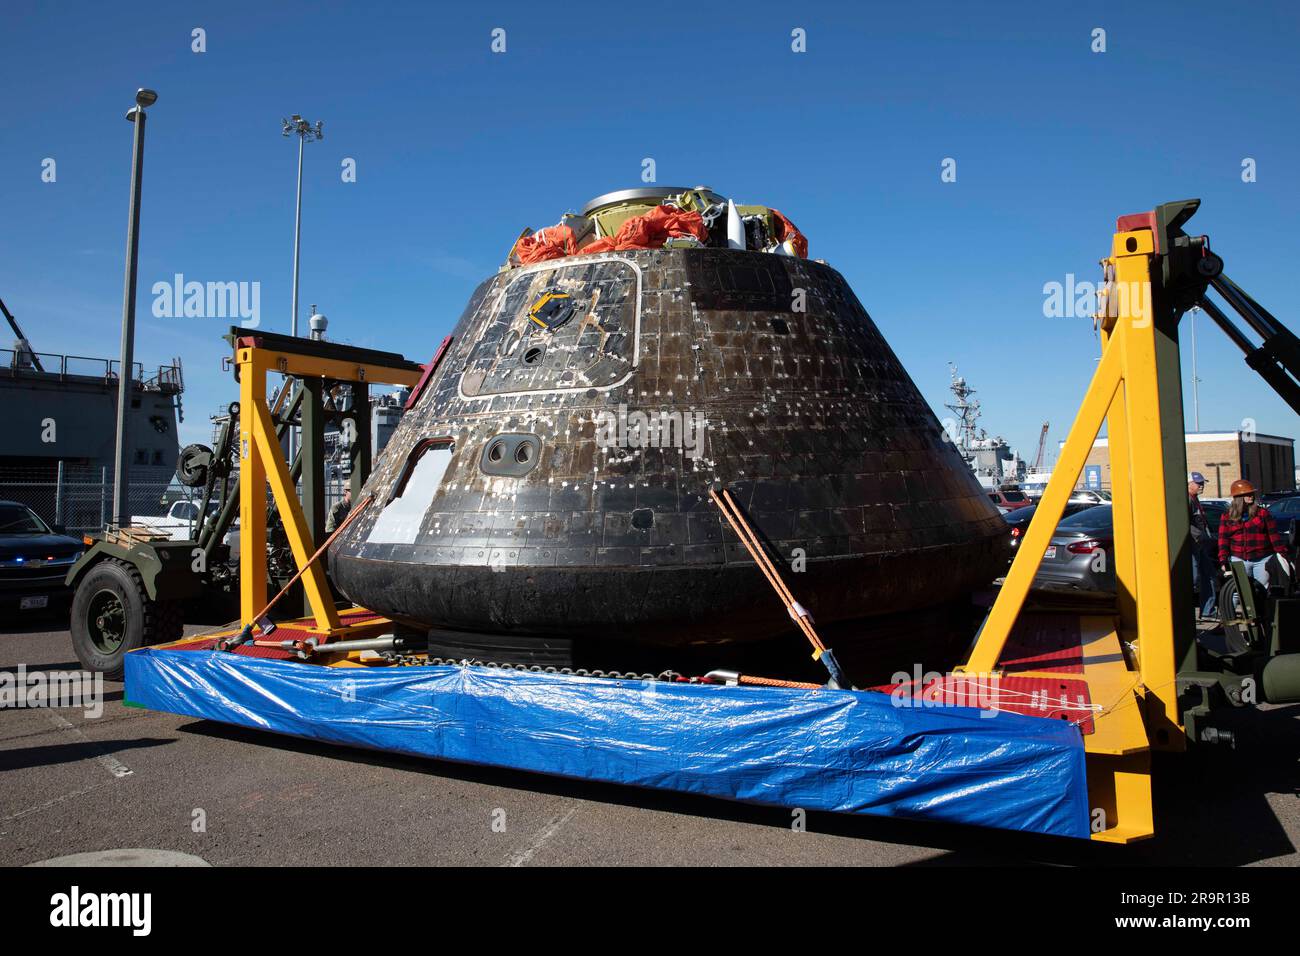 Orion Offload From USS Portland. Team members with NASA’s Exploration Ground Systems program successfully removed the Artemis I Orion spacecraft from the USS Portland Dec. 14, after the ship arrived at U.S. Naval Base San Diego. Stock Photo